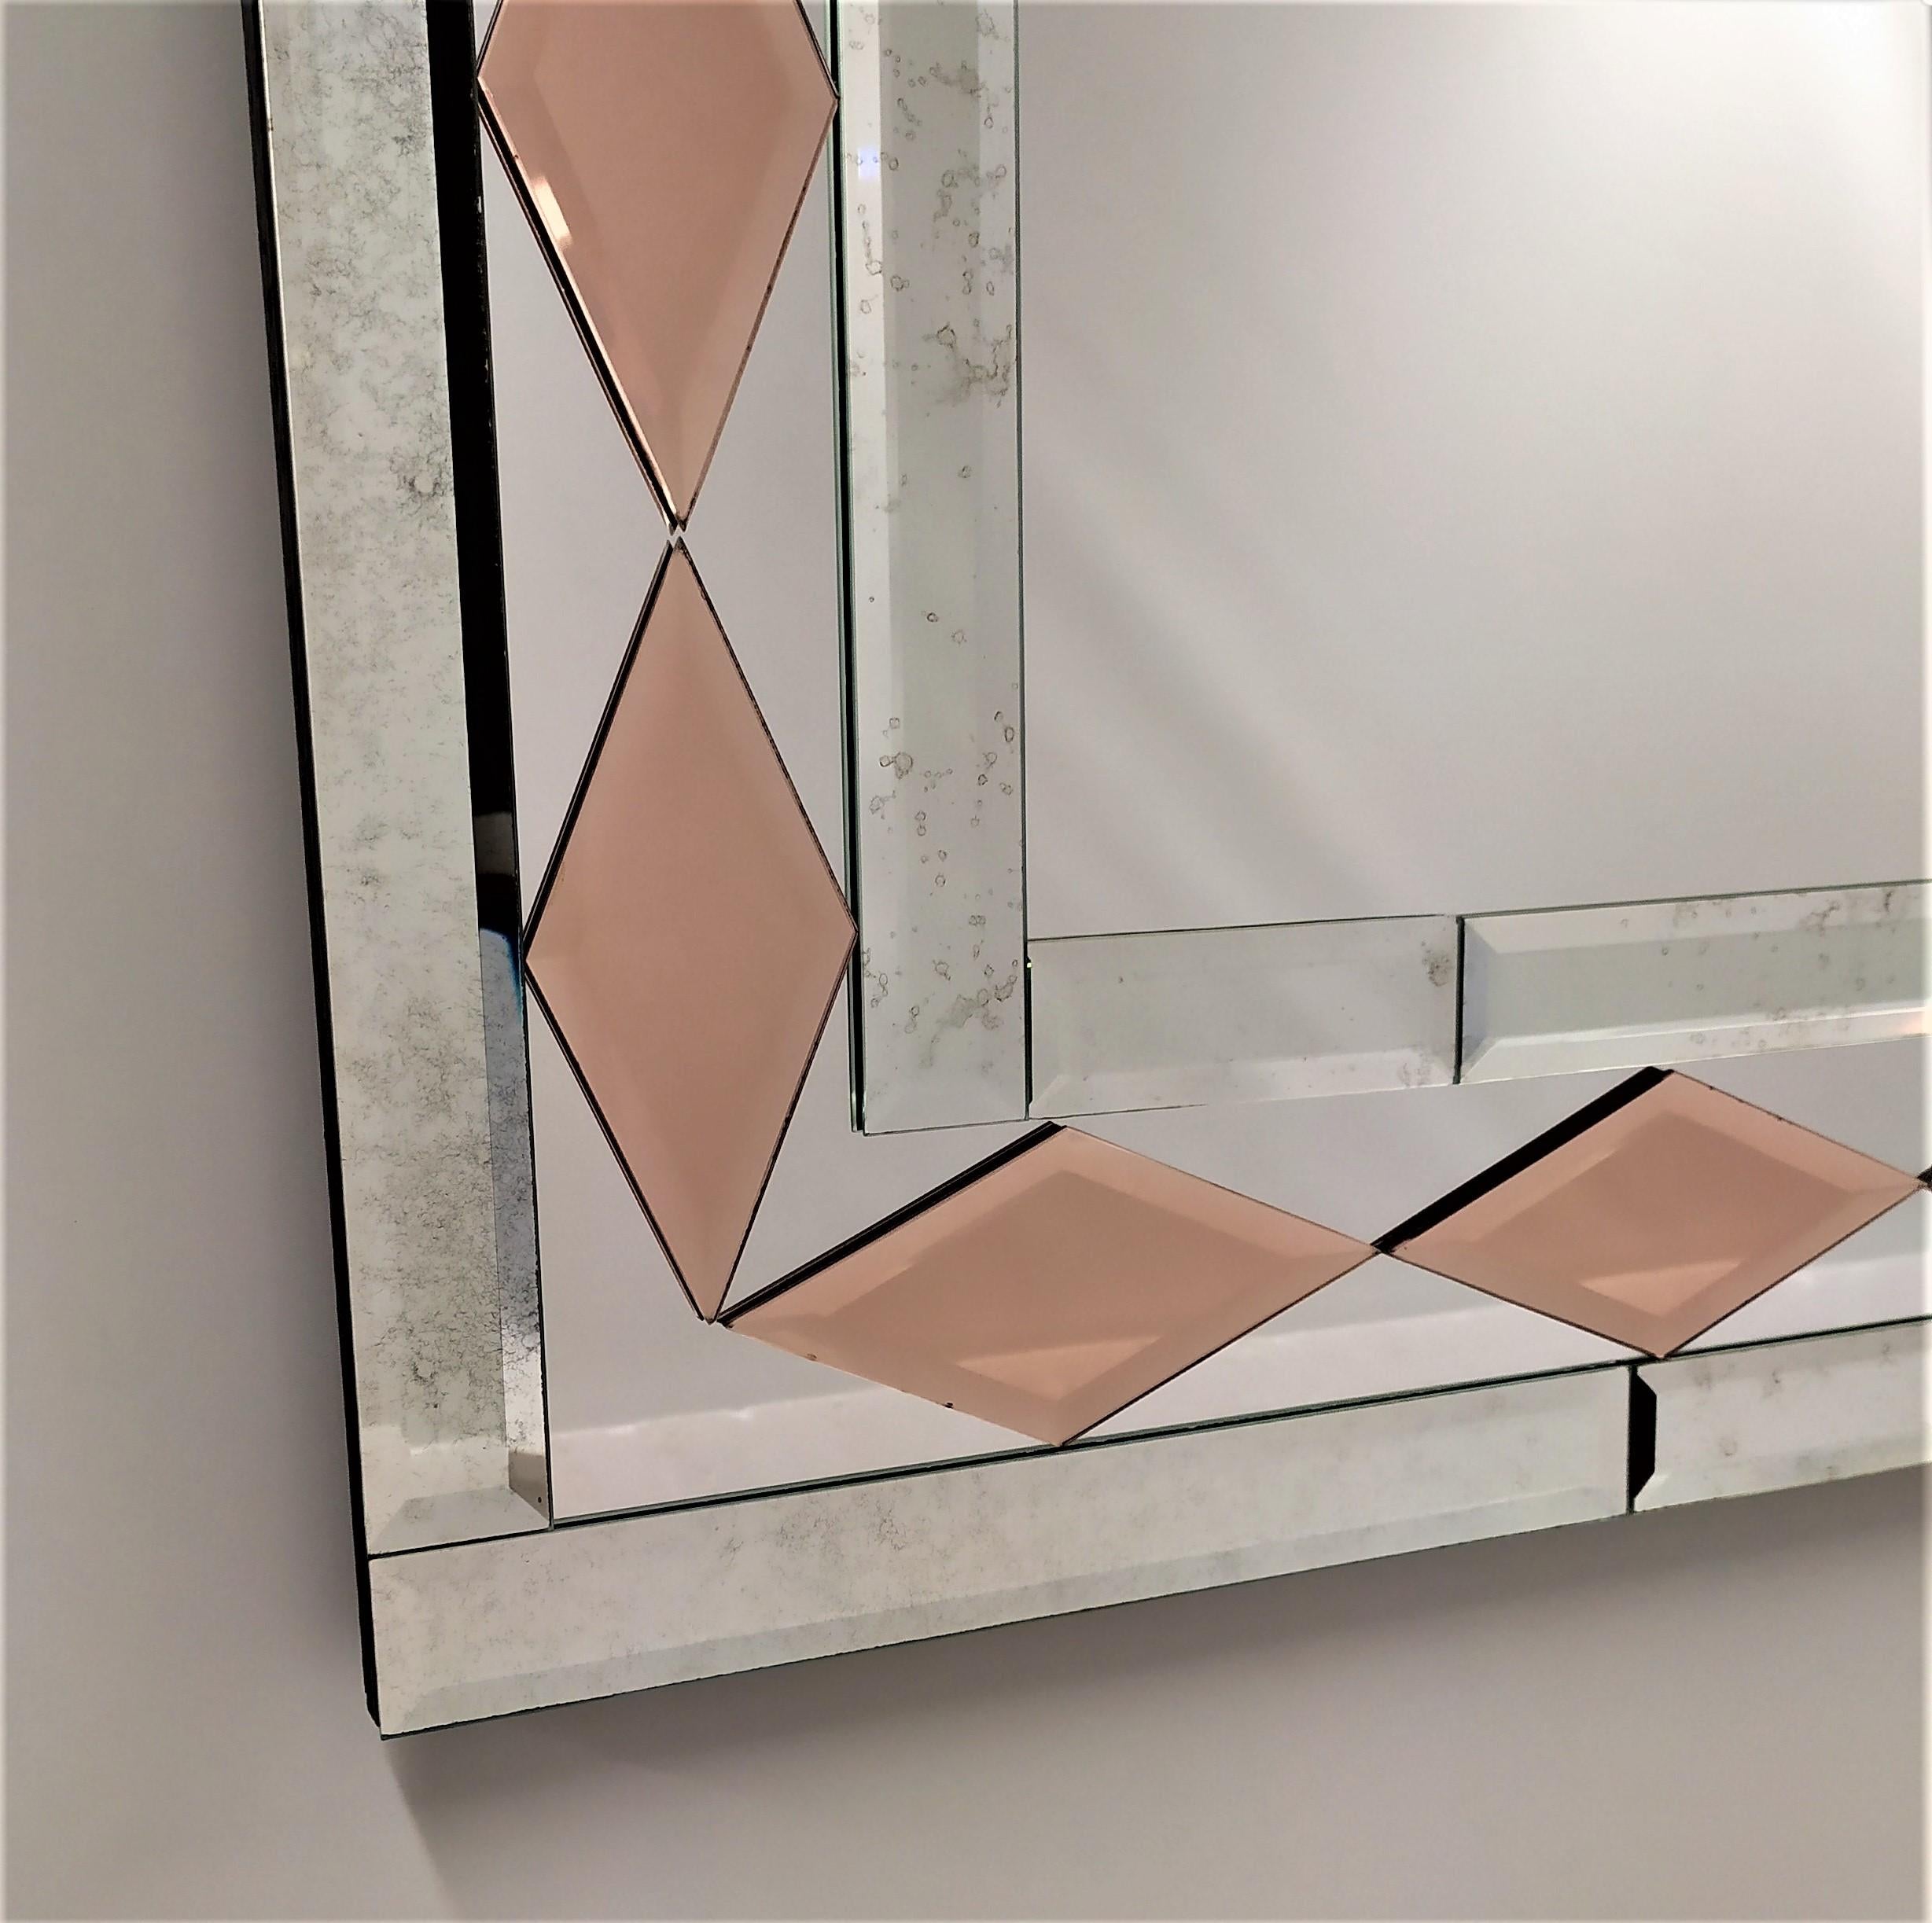 Other Pink Diamonds, Murano Glass Contemporary Mirror, by Fratelli Tosi